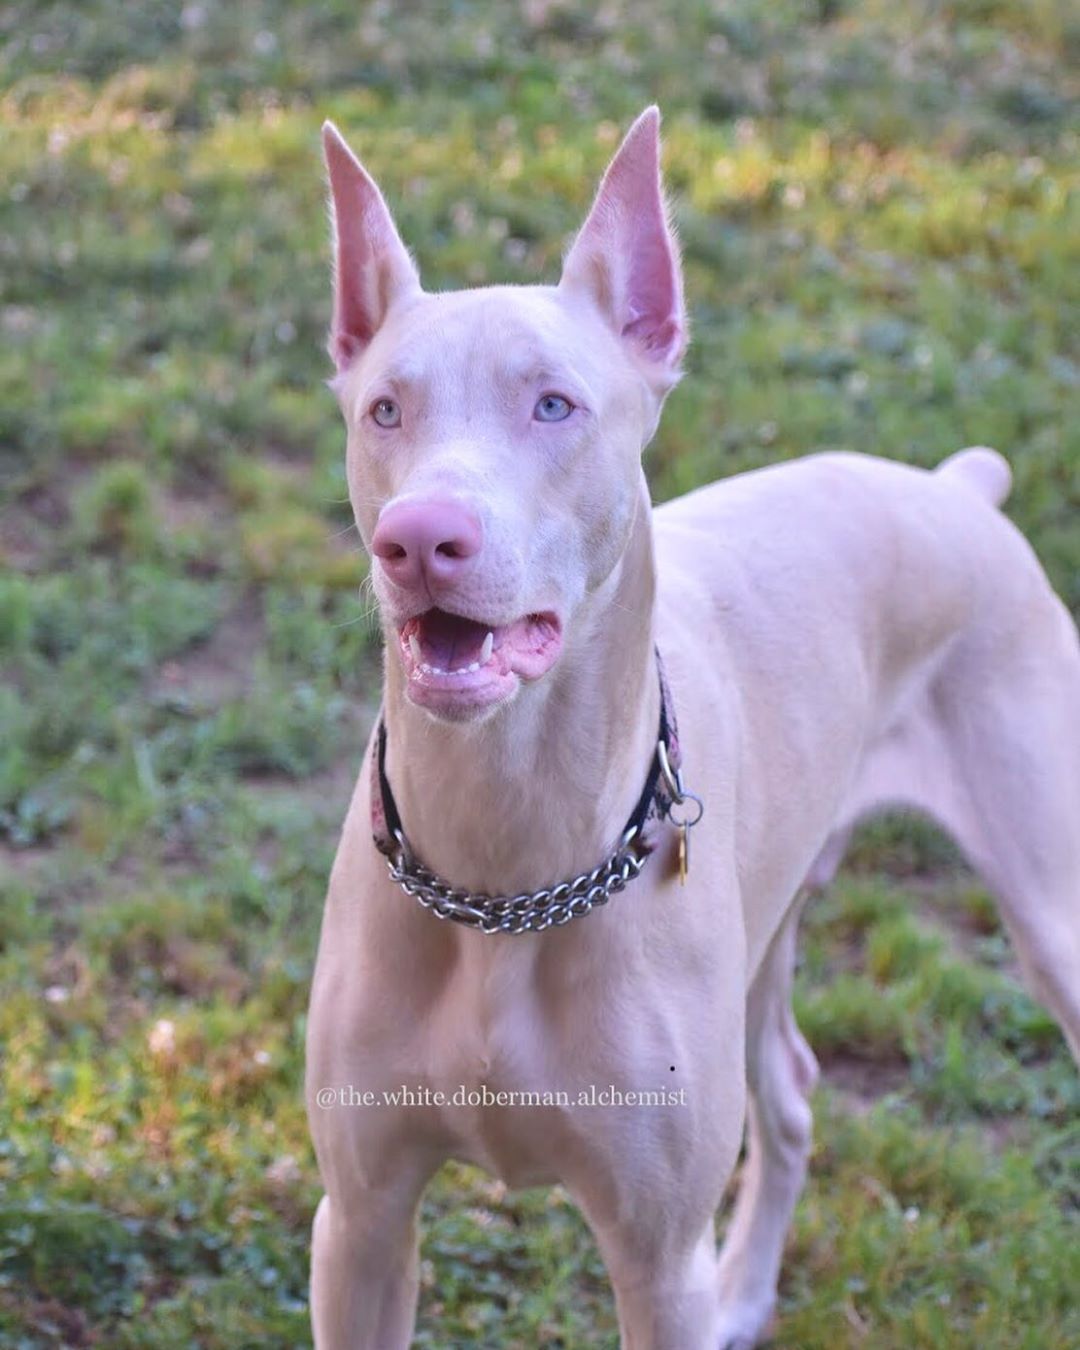 A white Doberman standing on the grass with its mouth slightly open